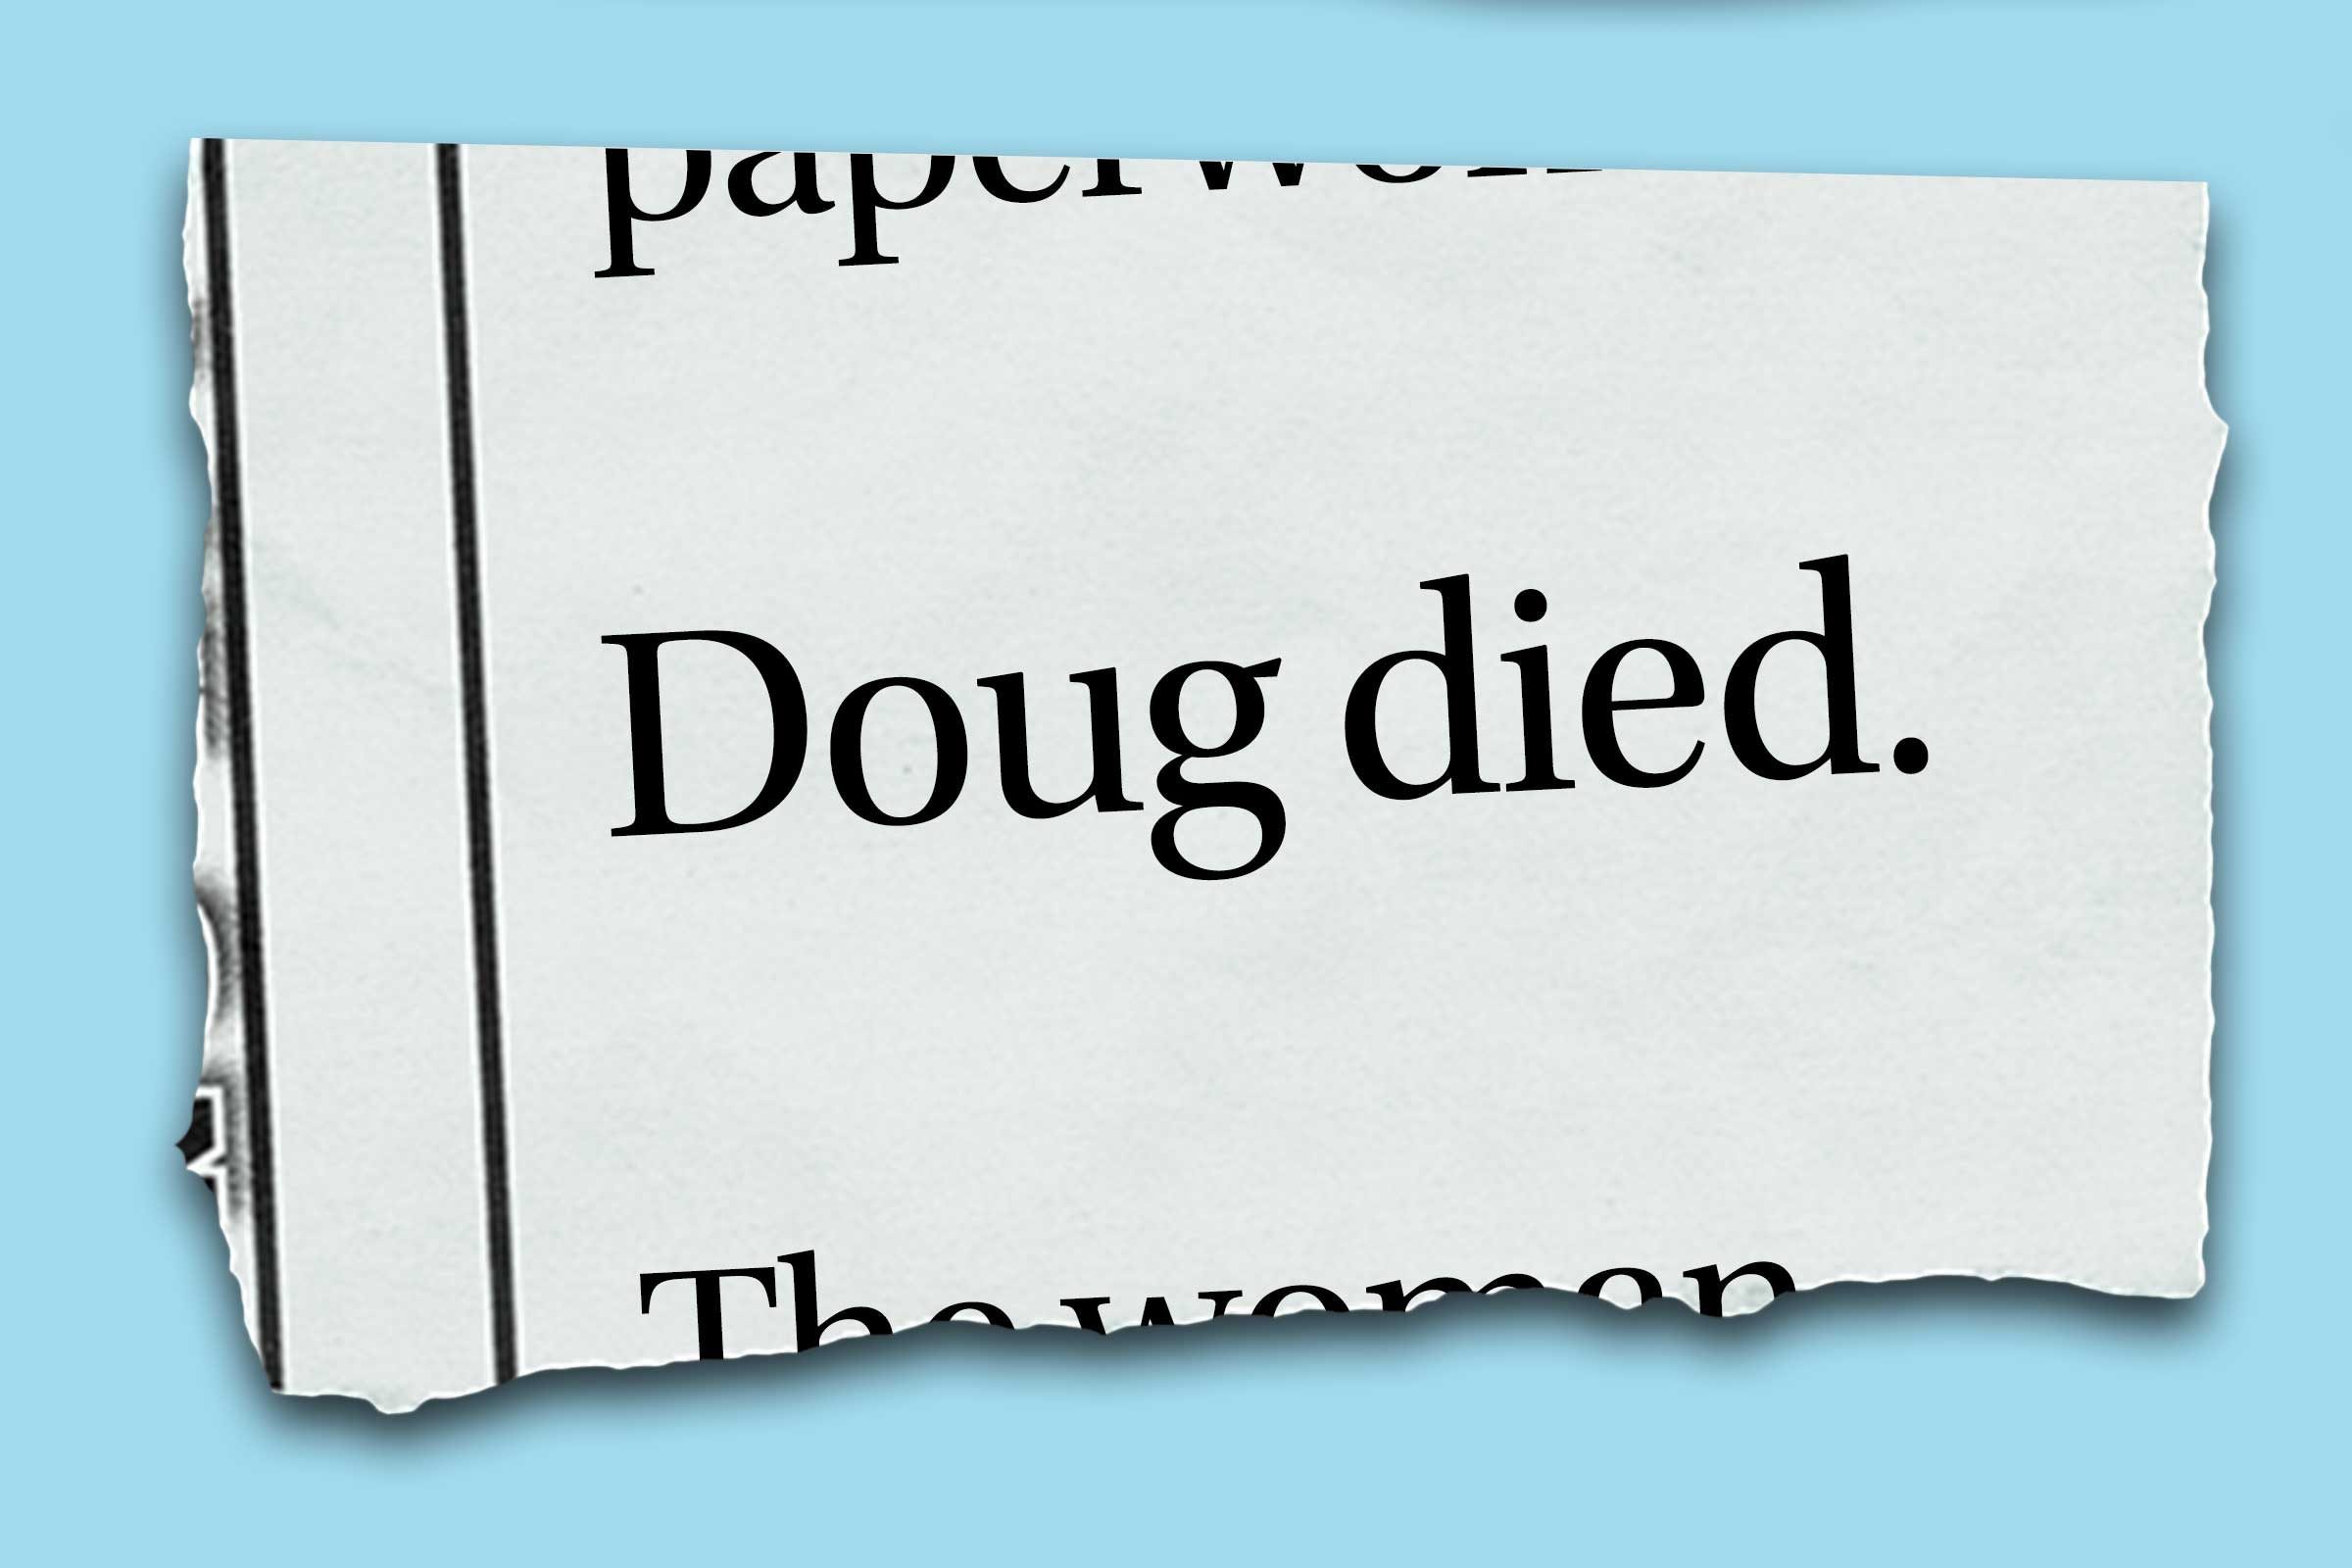 Funniest obituaries that really exist - Doug died."